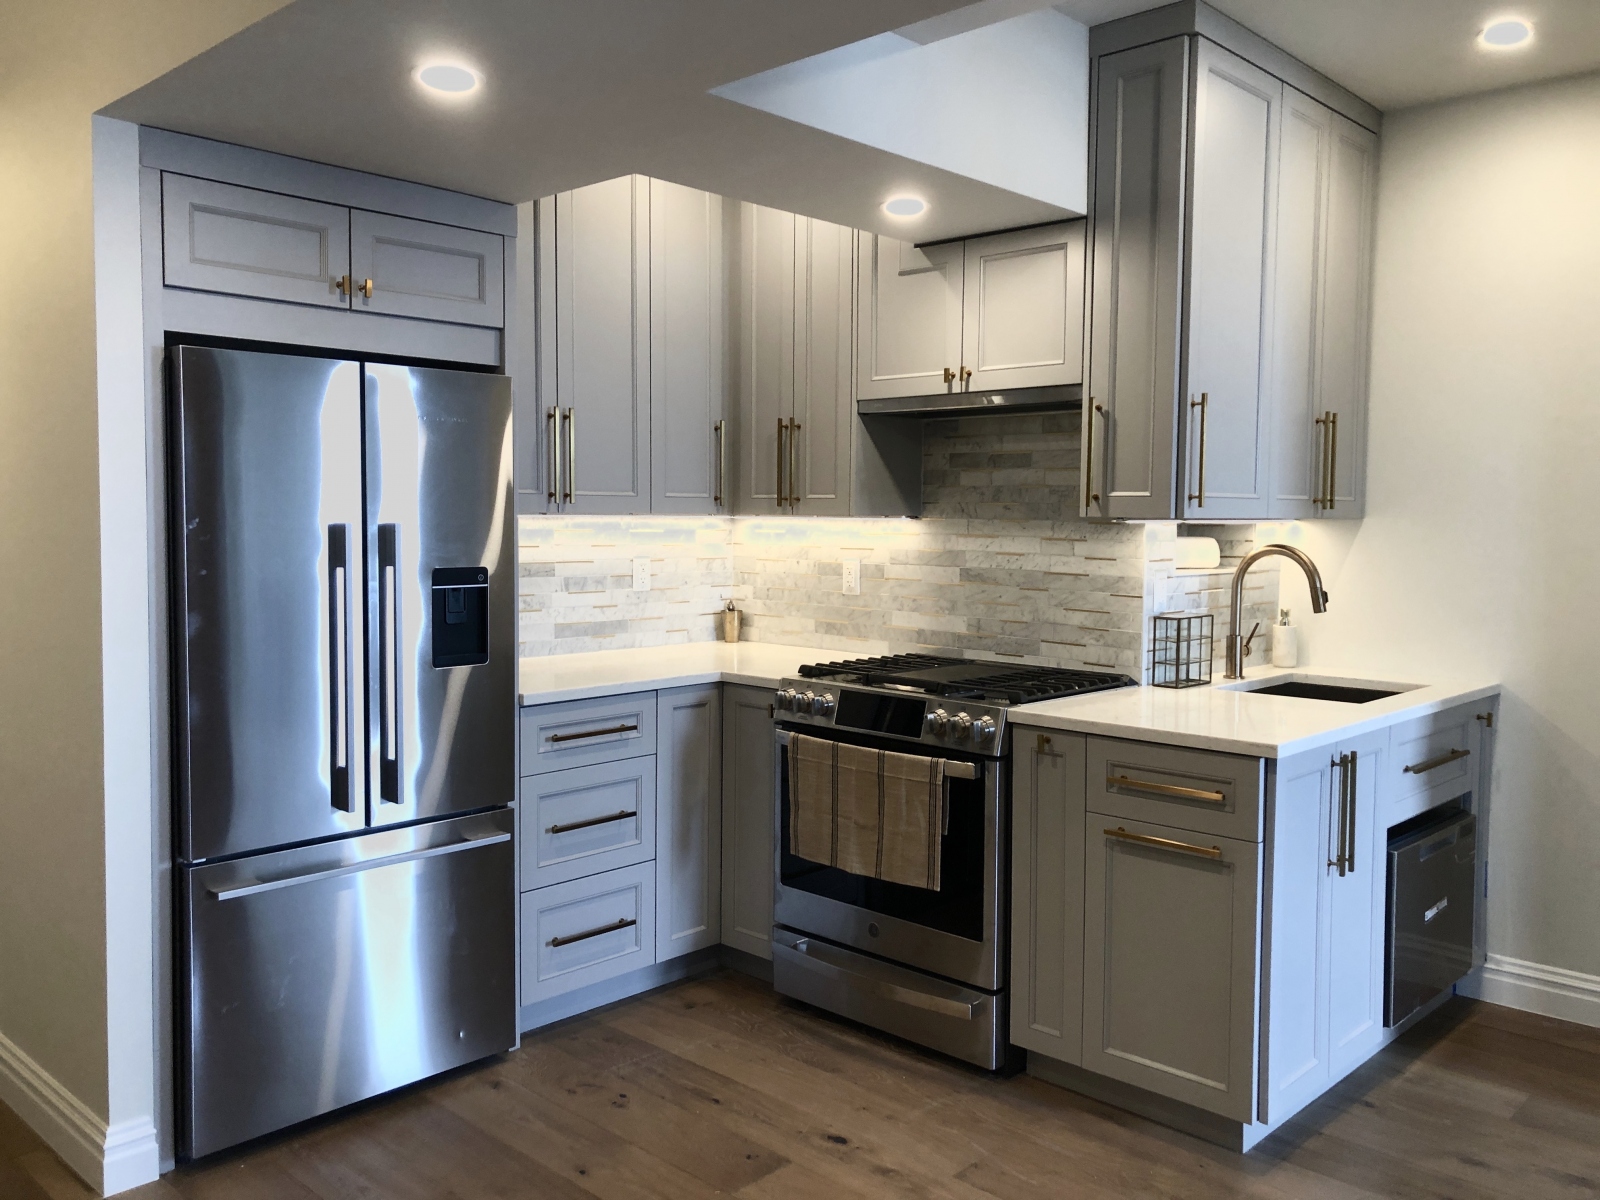 Bright, custom kitchen with spacious white cabinets,  and modern design.